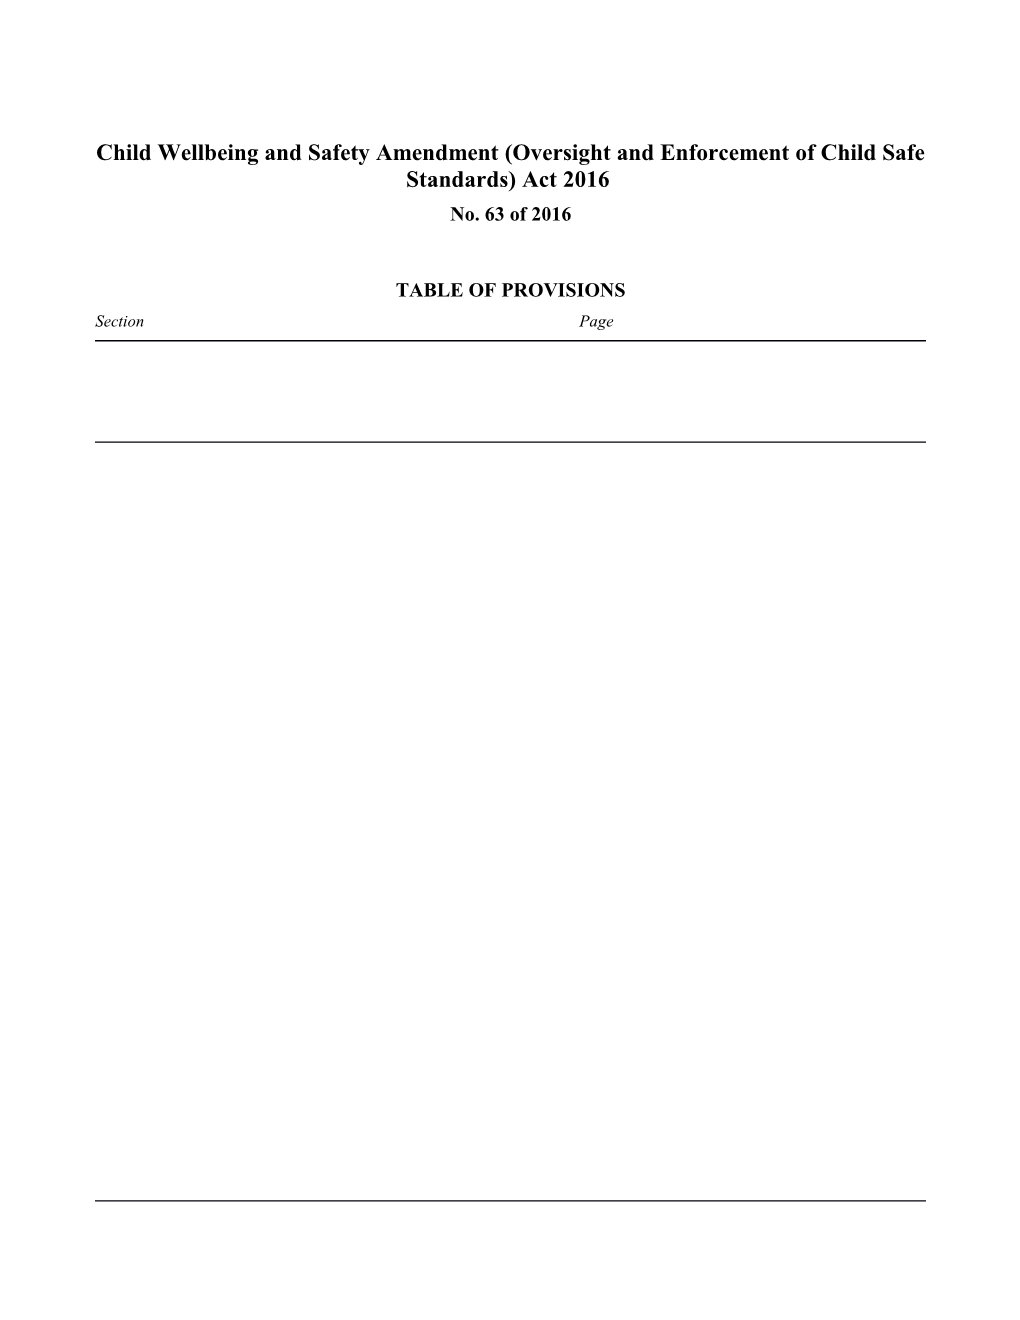 Child Wellbeing and Safety Amendment (Oversight and Enforcement of Child Safe Standards)